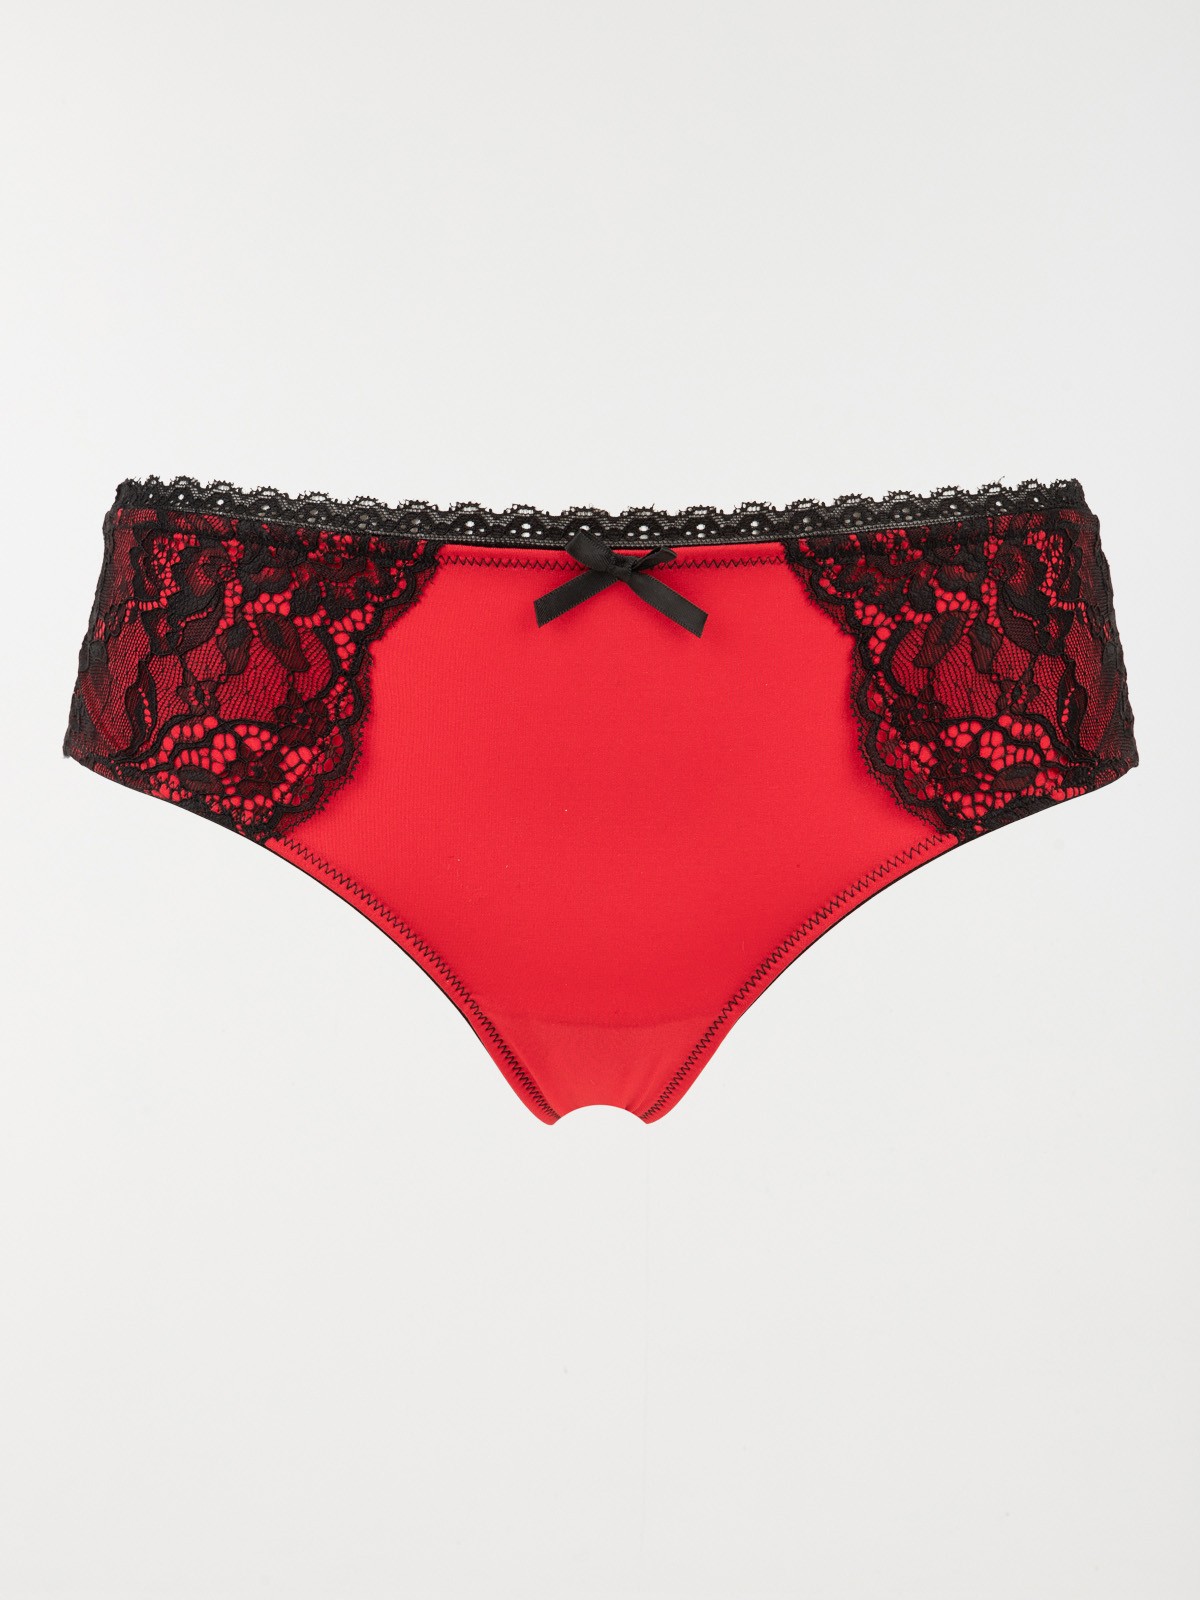 moord Prominent verbrand Shorty string rouge kiss femme (36-46) - DistriCenter